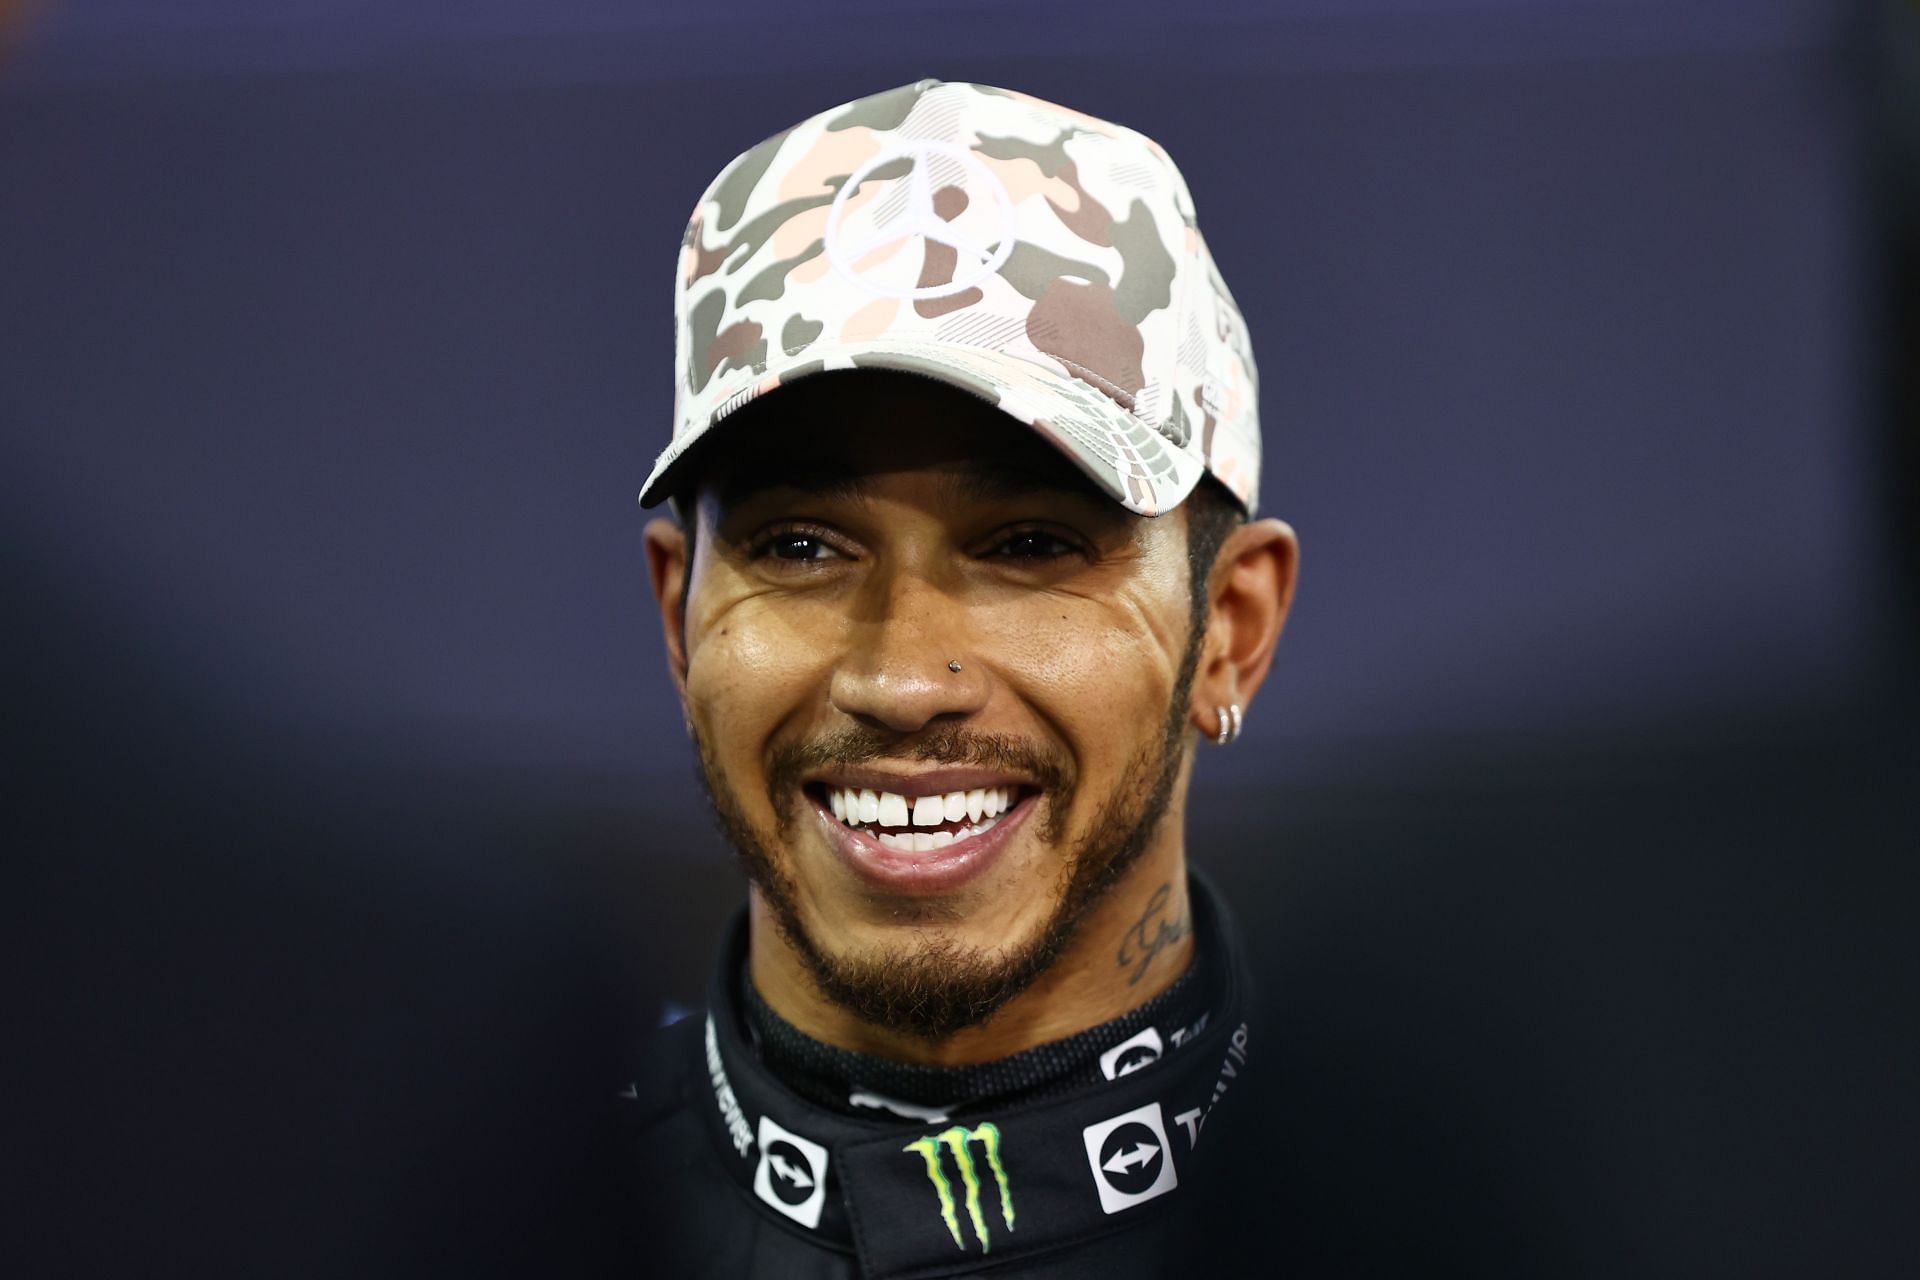 Lewis Hamilton could have an ominous trend working against him at the 2021 Abu Dhabi GP.